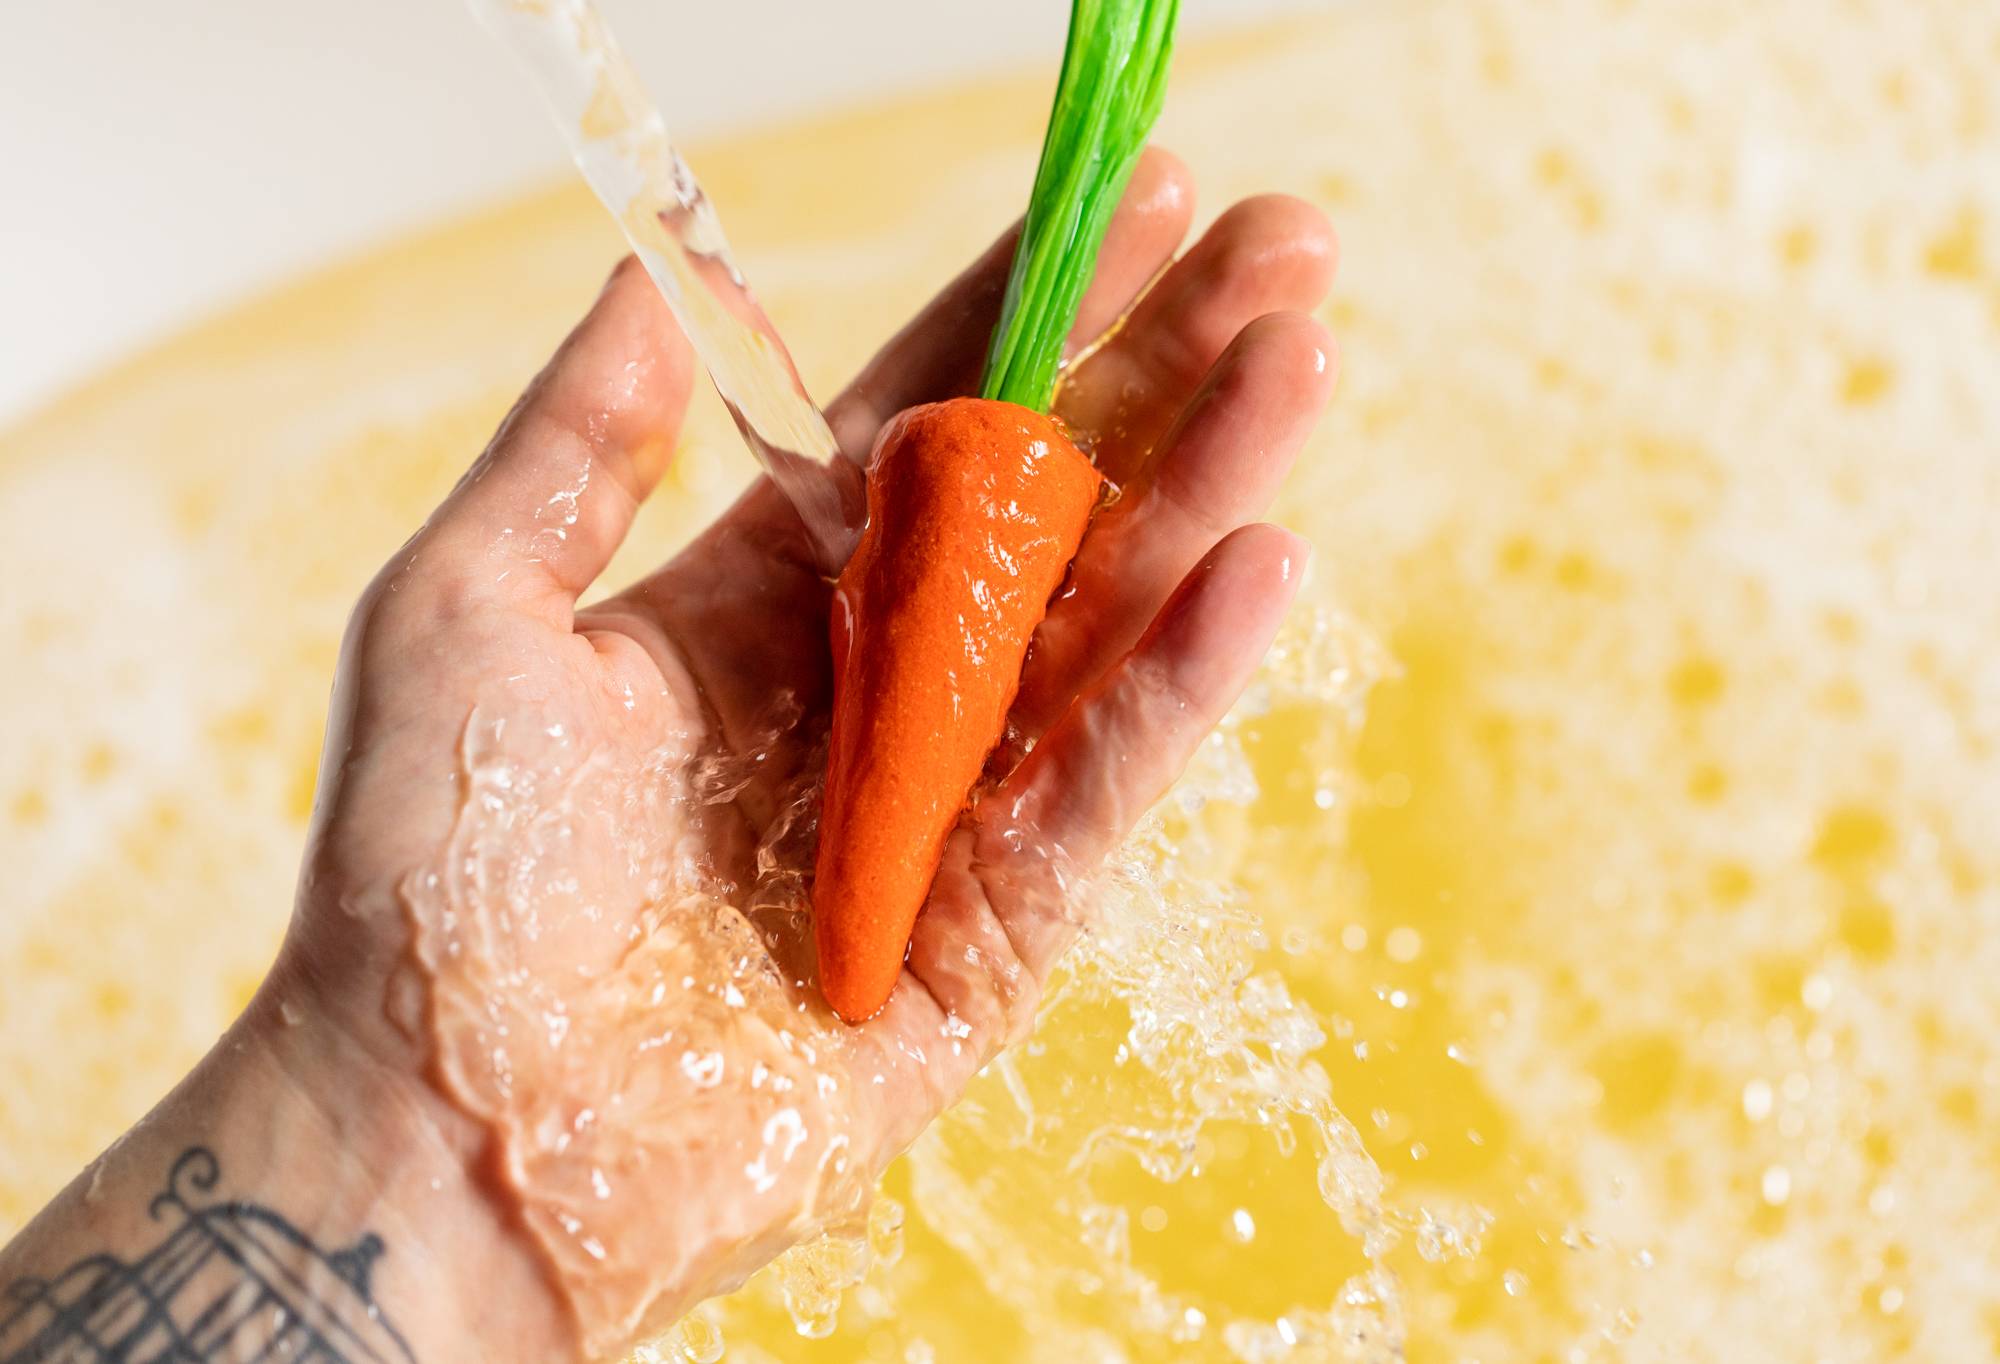 A close-up image of the model's hand holding the orange carrot bubble bar under running water creating light, bubbly water below. 